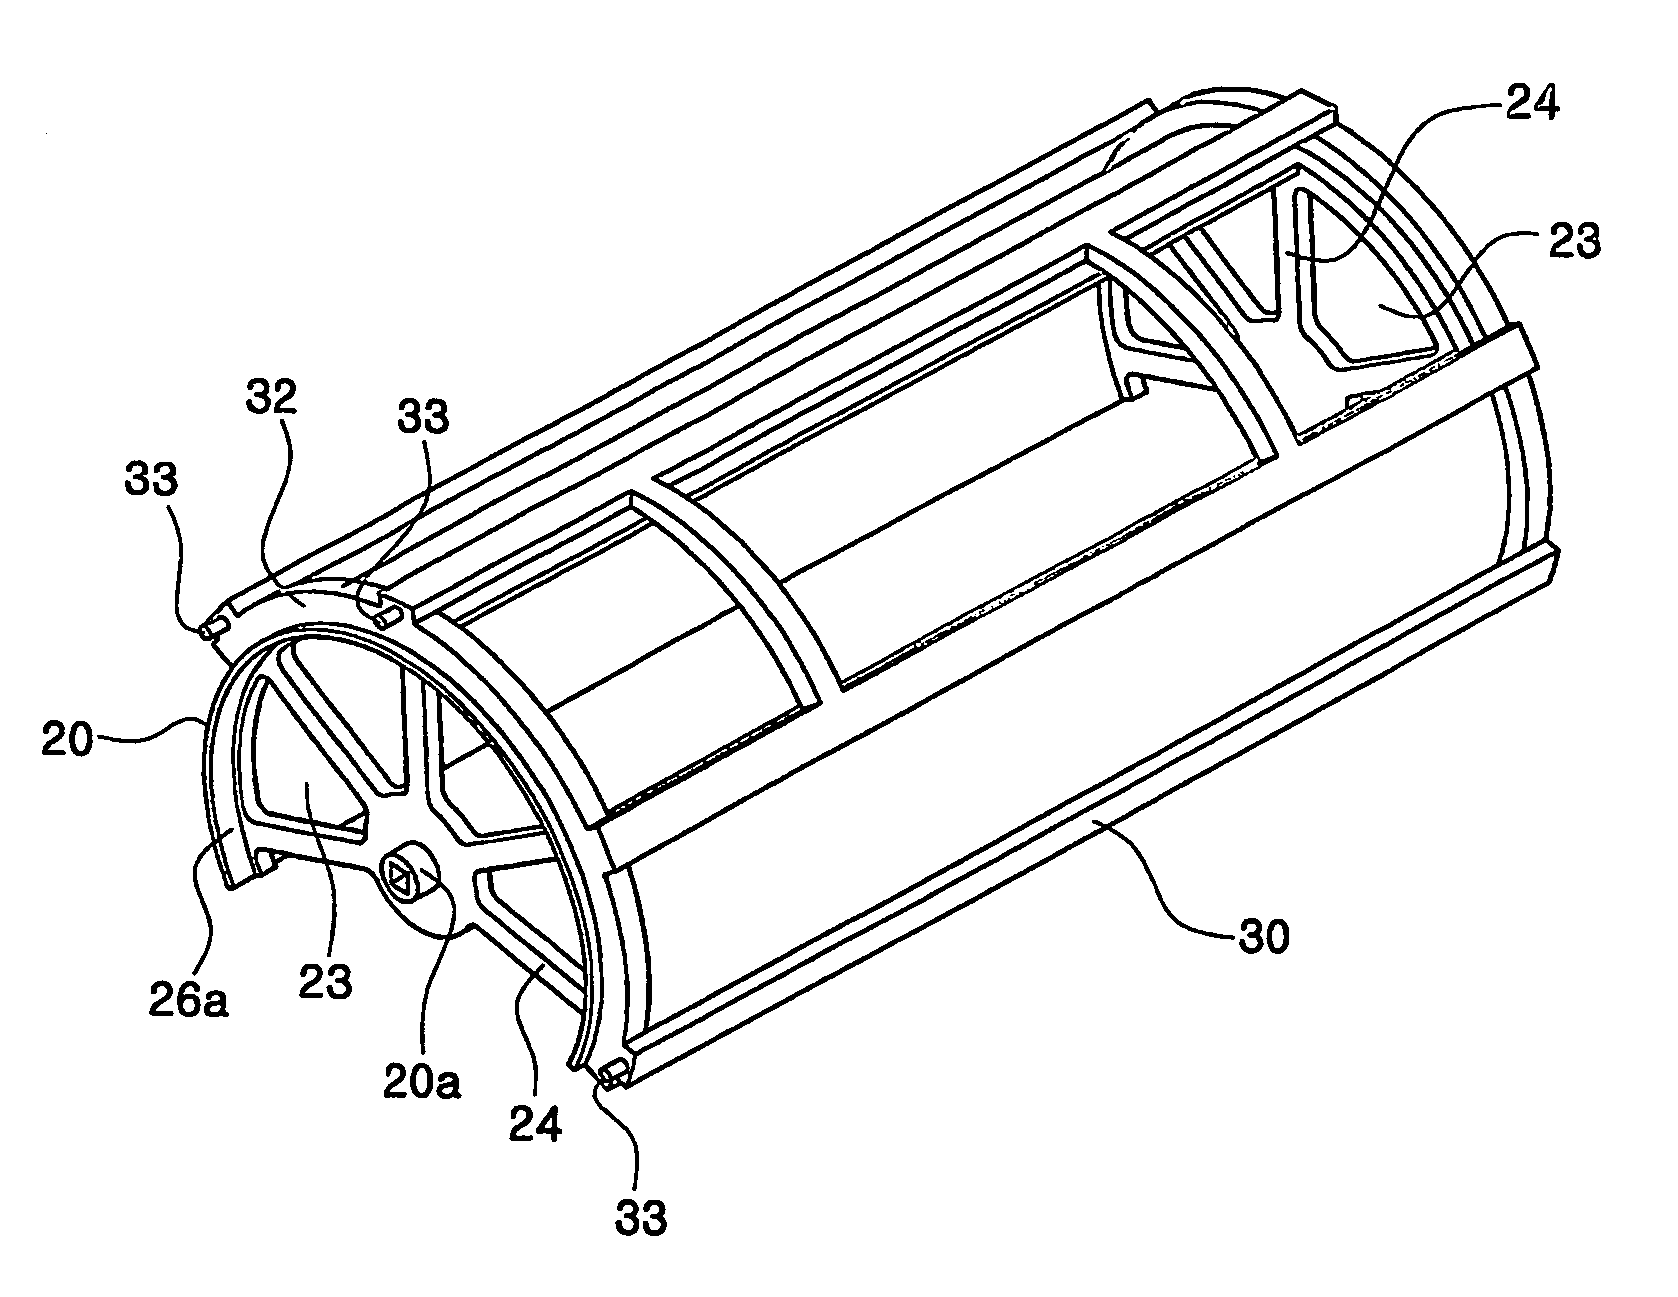 Mode door for the automotive vehicle air conditioning system